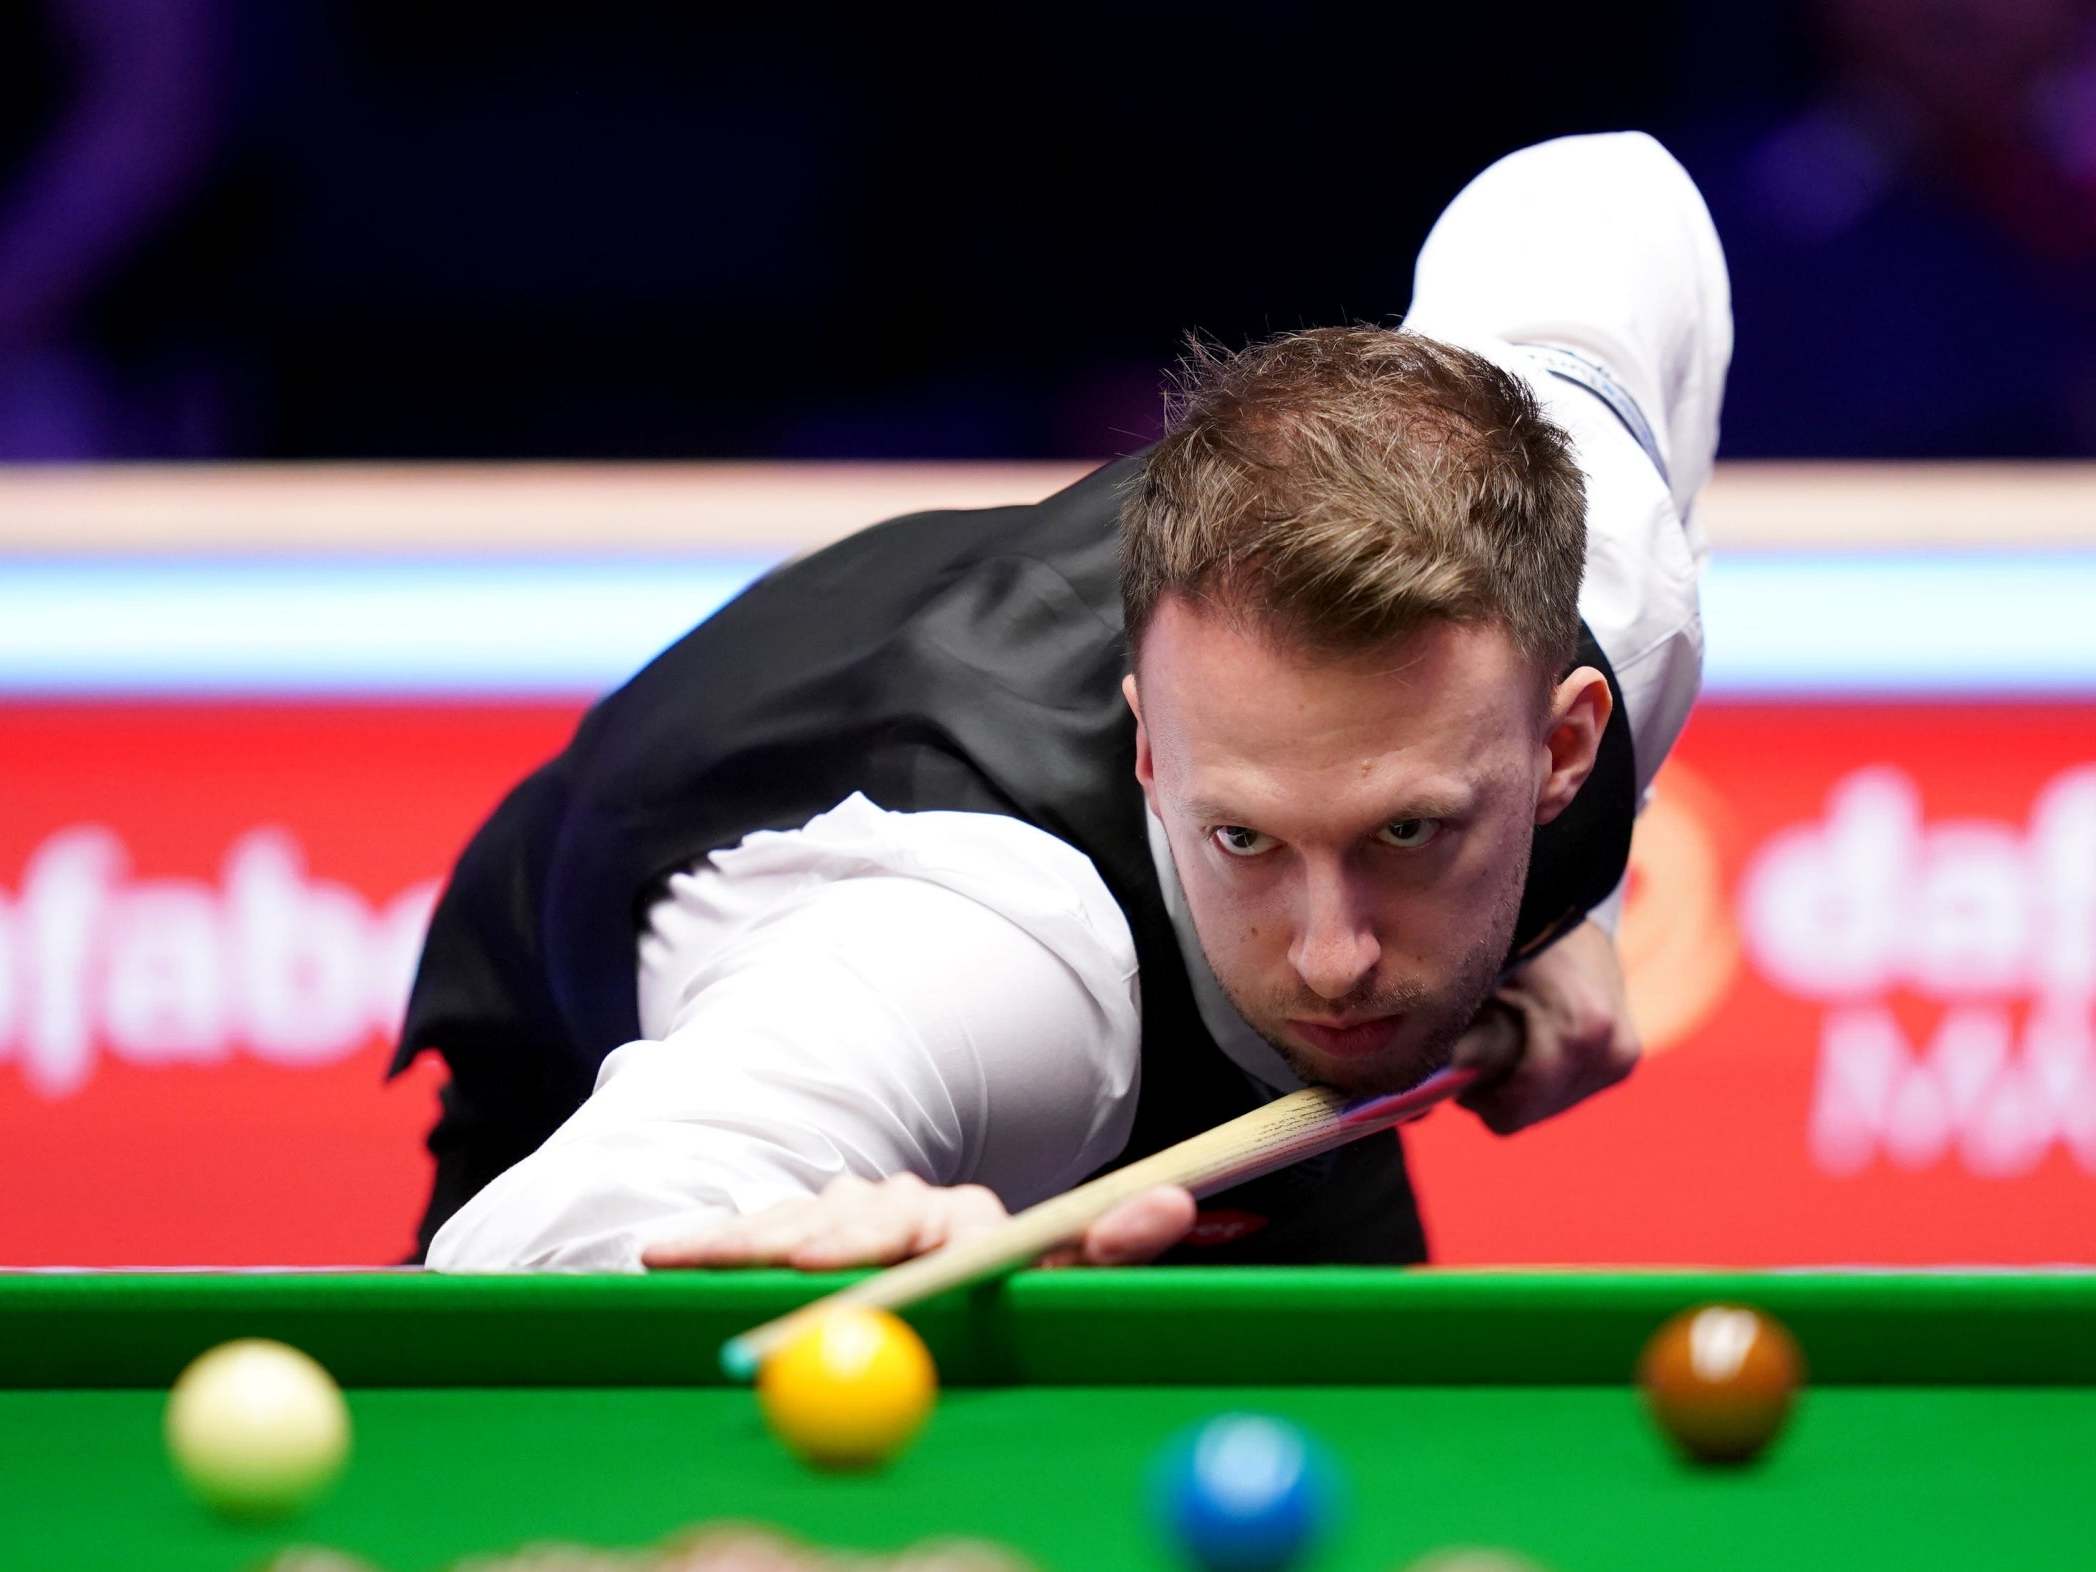 Judd Trump is the reigning champion